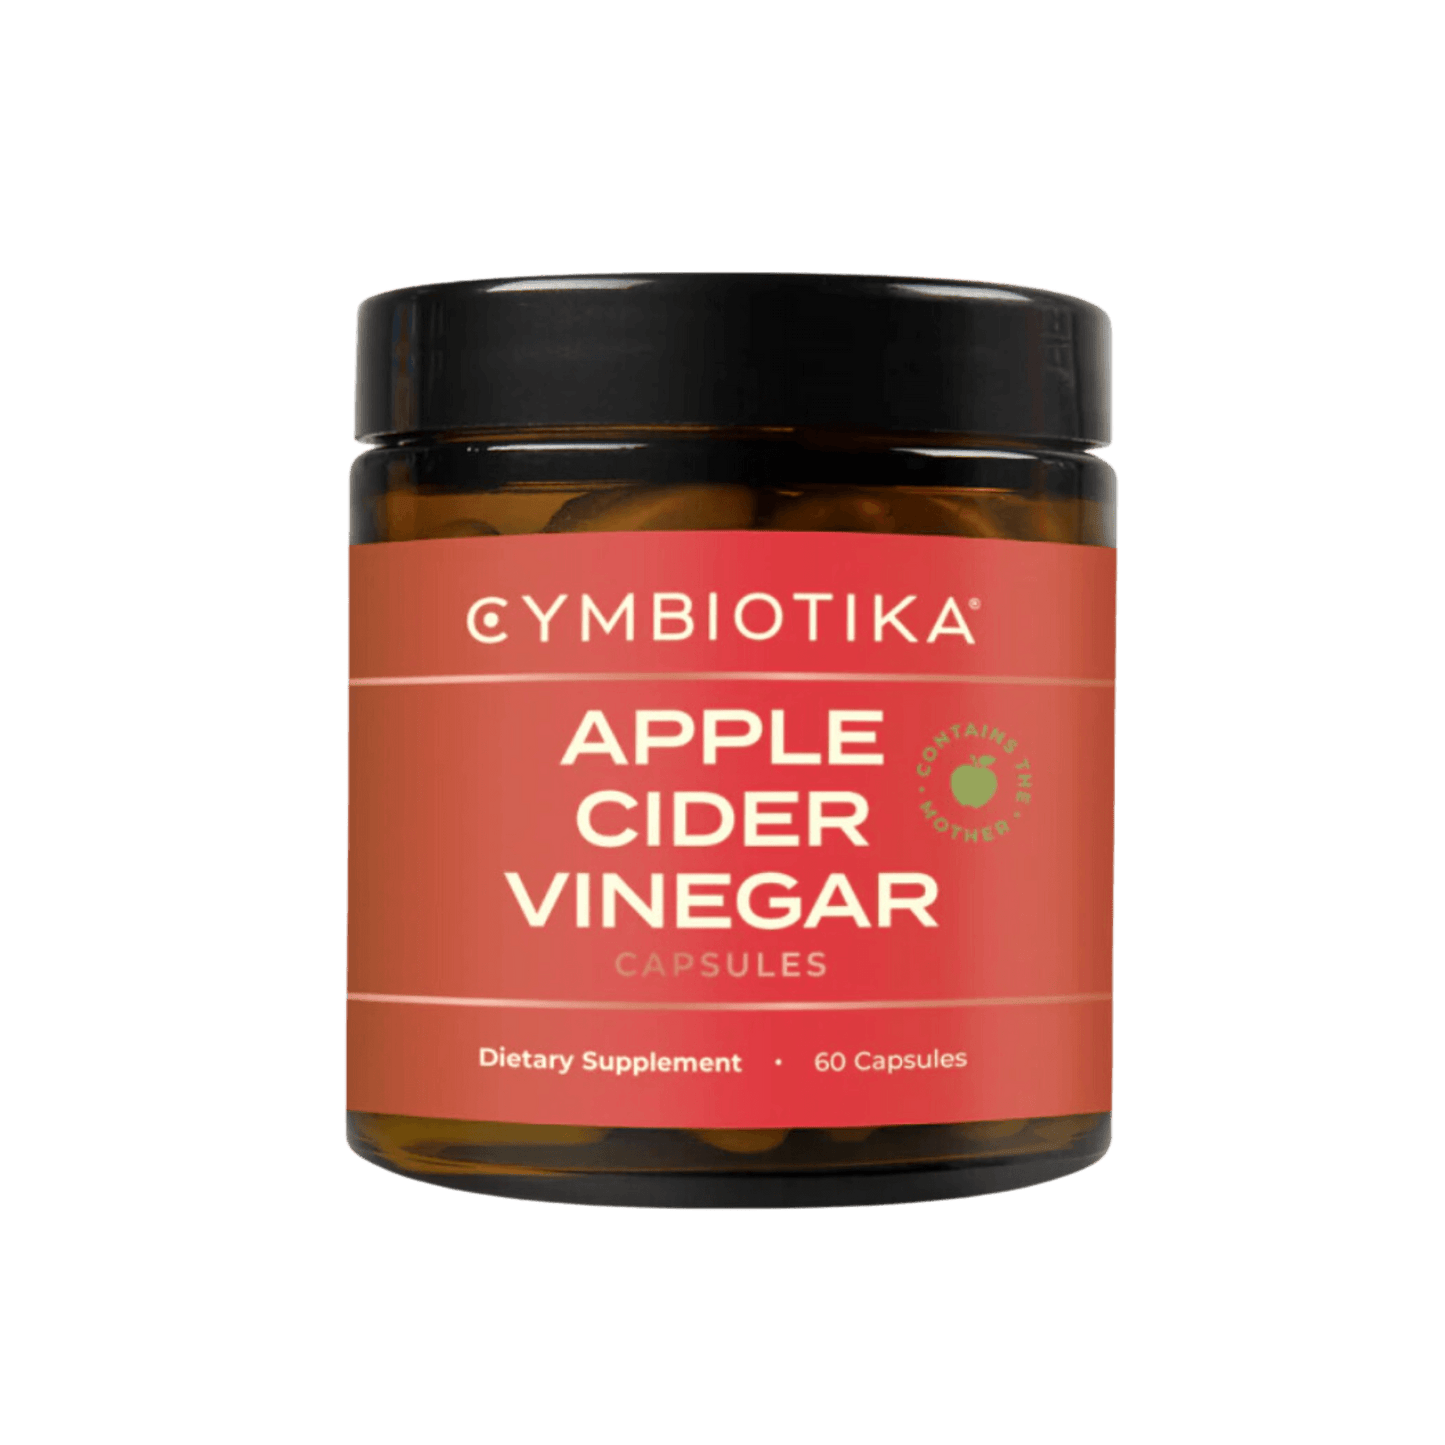 Image of Cymbiotika apple cider vinegar capsules in a glass bottle